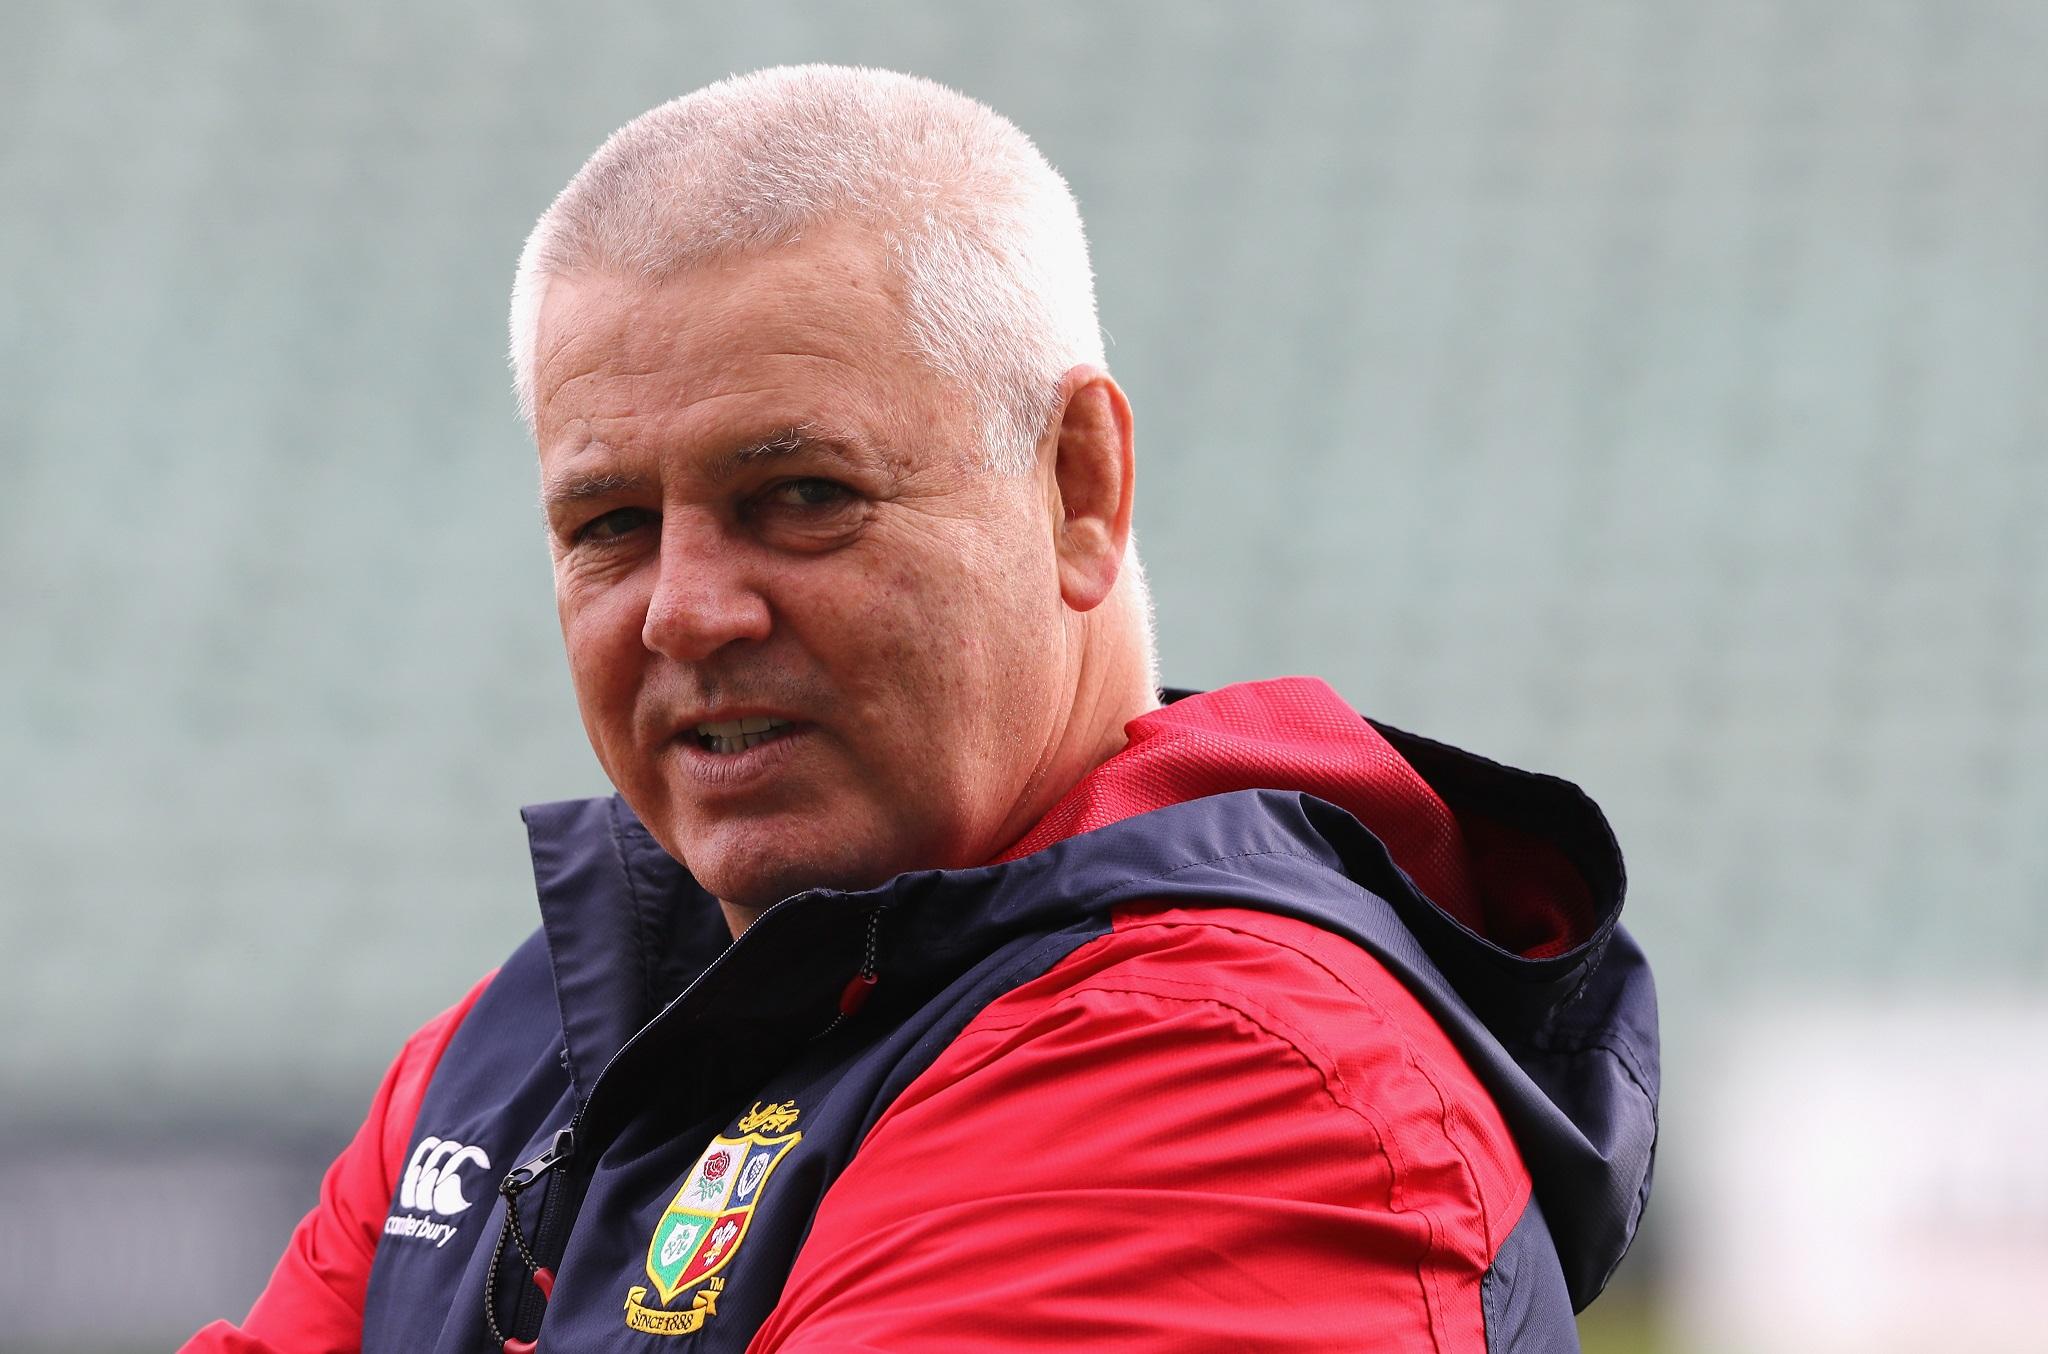 Warren Gatland has tasked his Lions squad to make history and leave a legacy in New Zealand